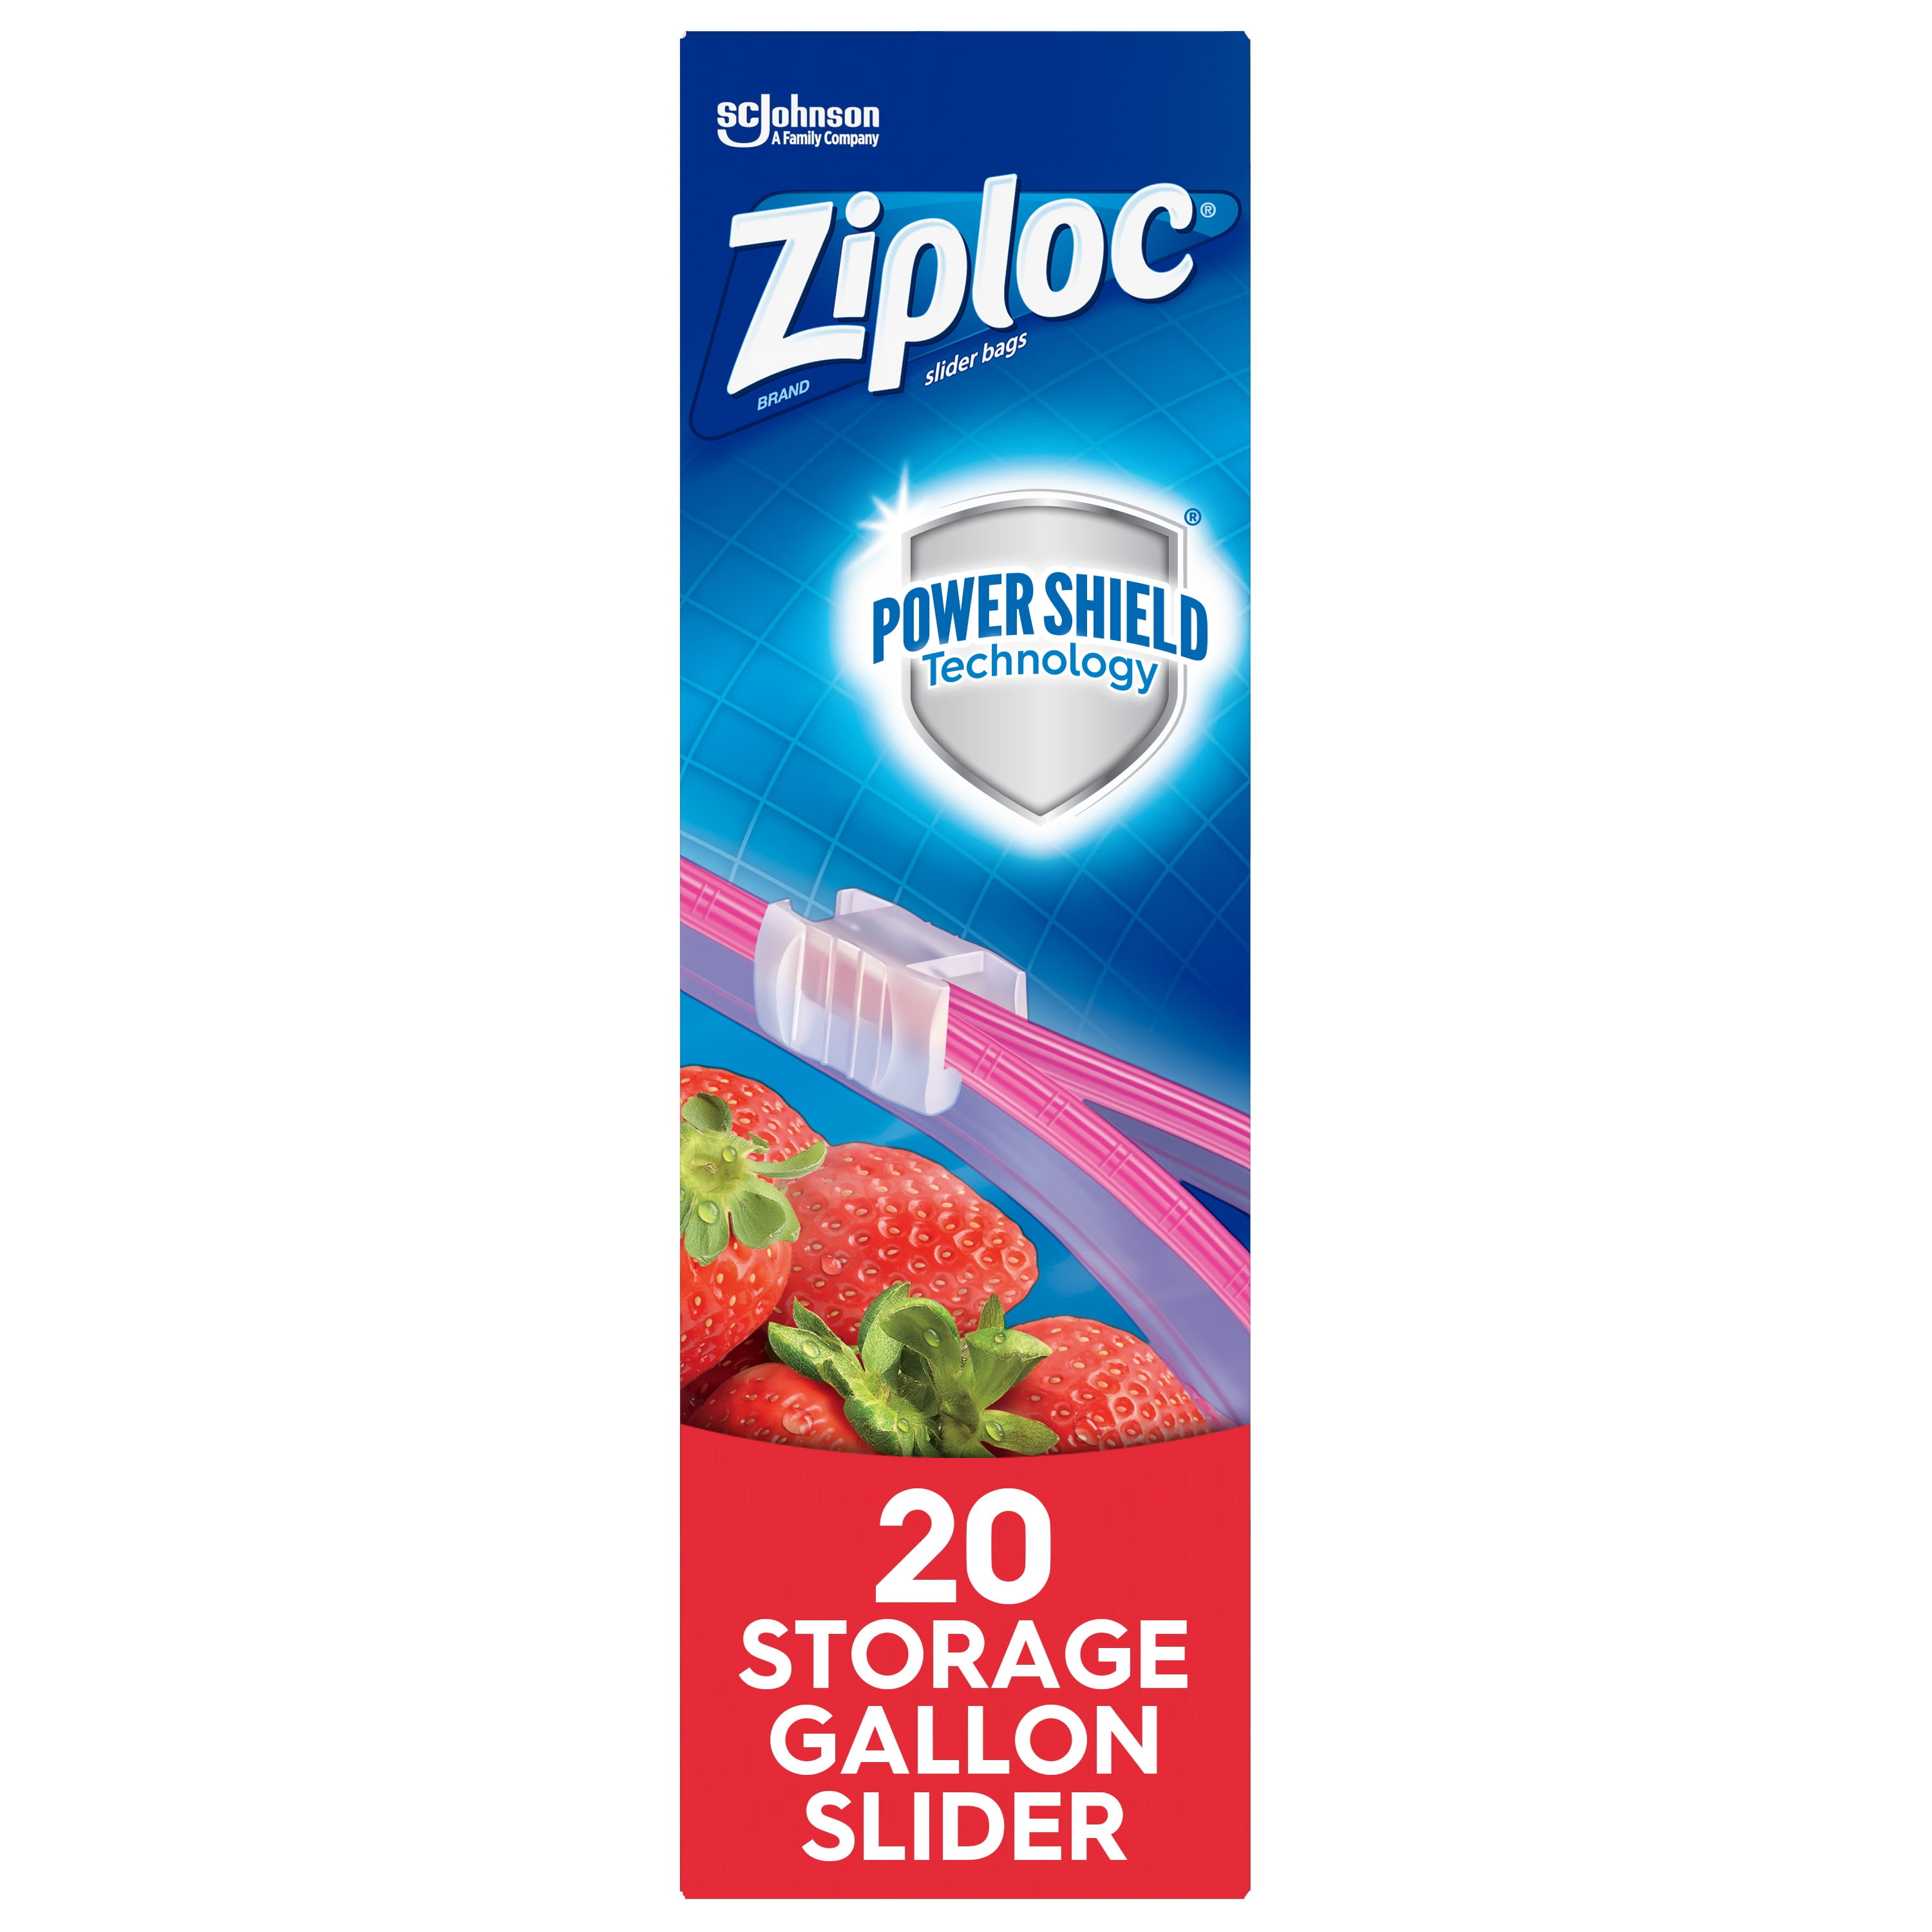 Ziploc Brand Slider Storage Bags with Power Shield Technology, Gallon, 20 Count, Clear